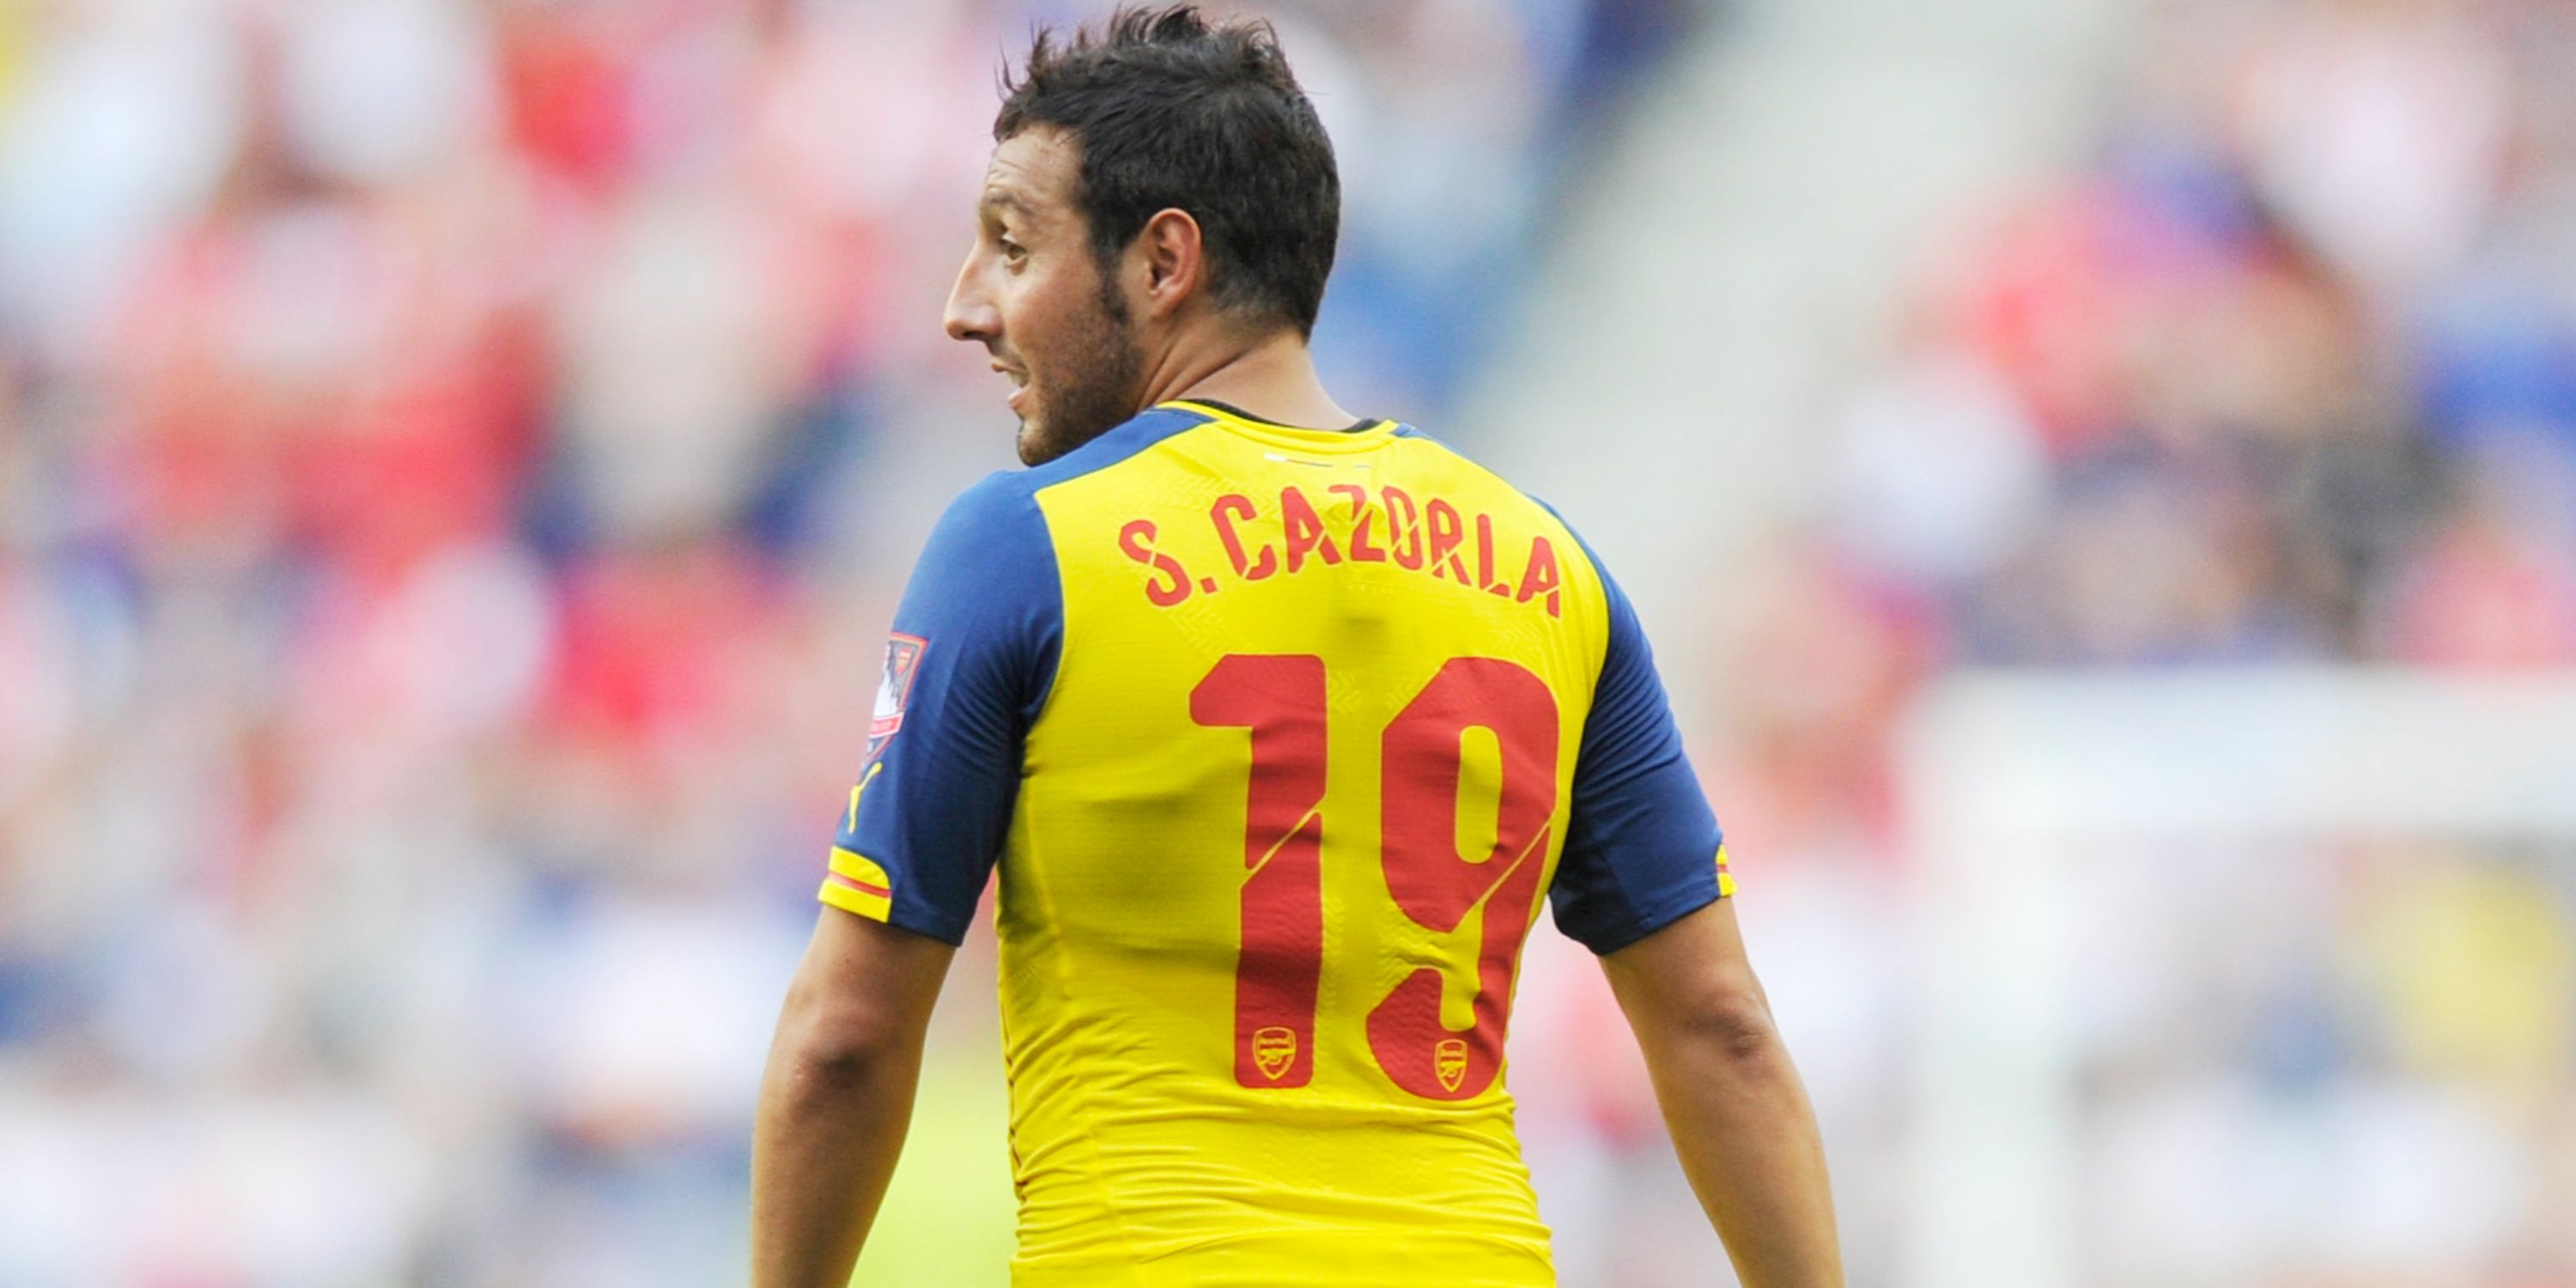 Arsenal's yellow and blue number